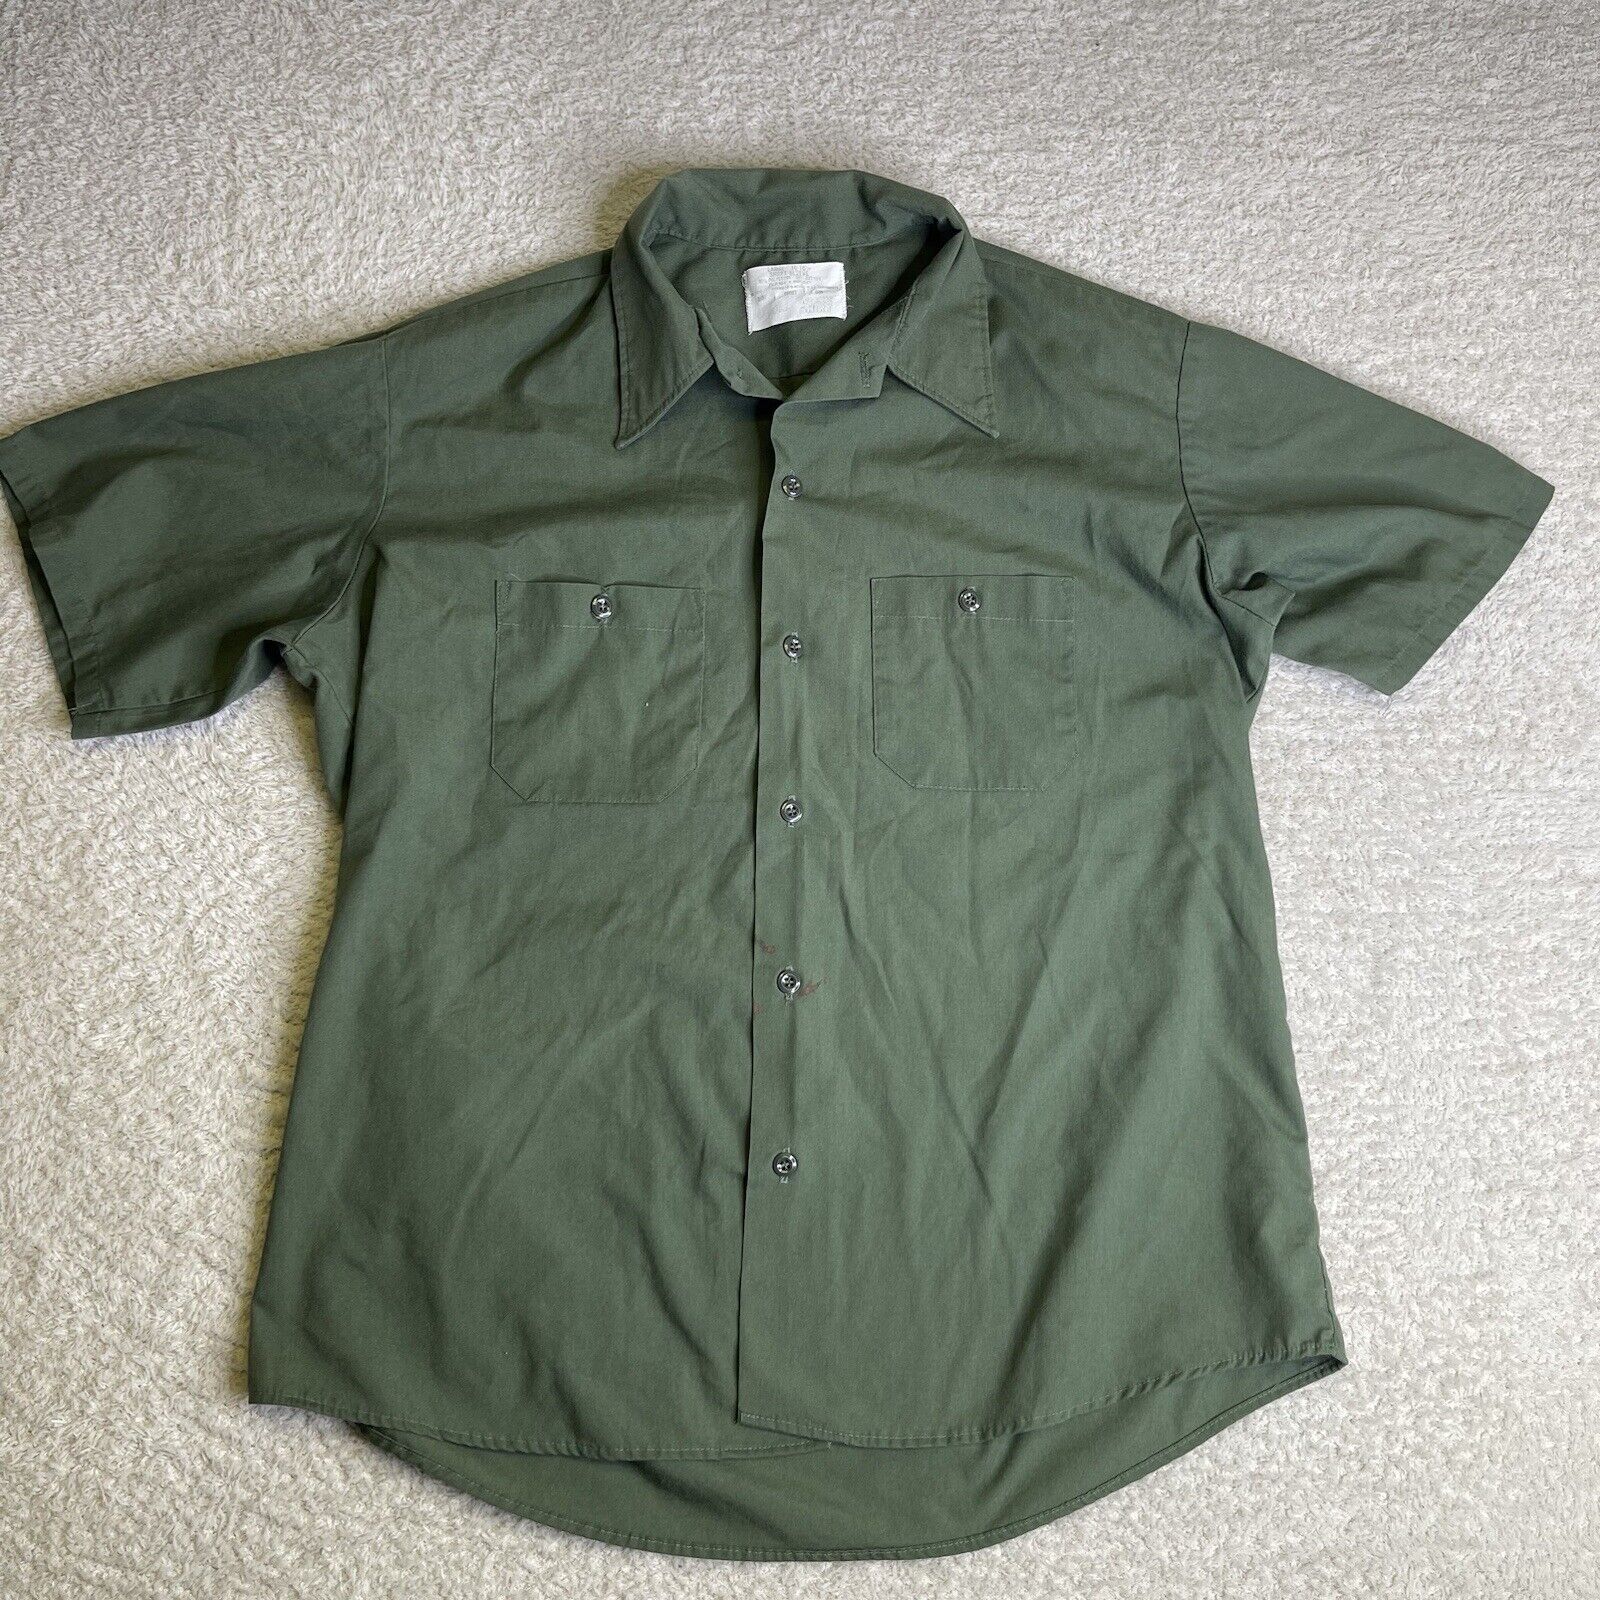 Vintage Sears Work Shirt Mens Large Button Up Short Sleeve Green Perma Prest 70s